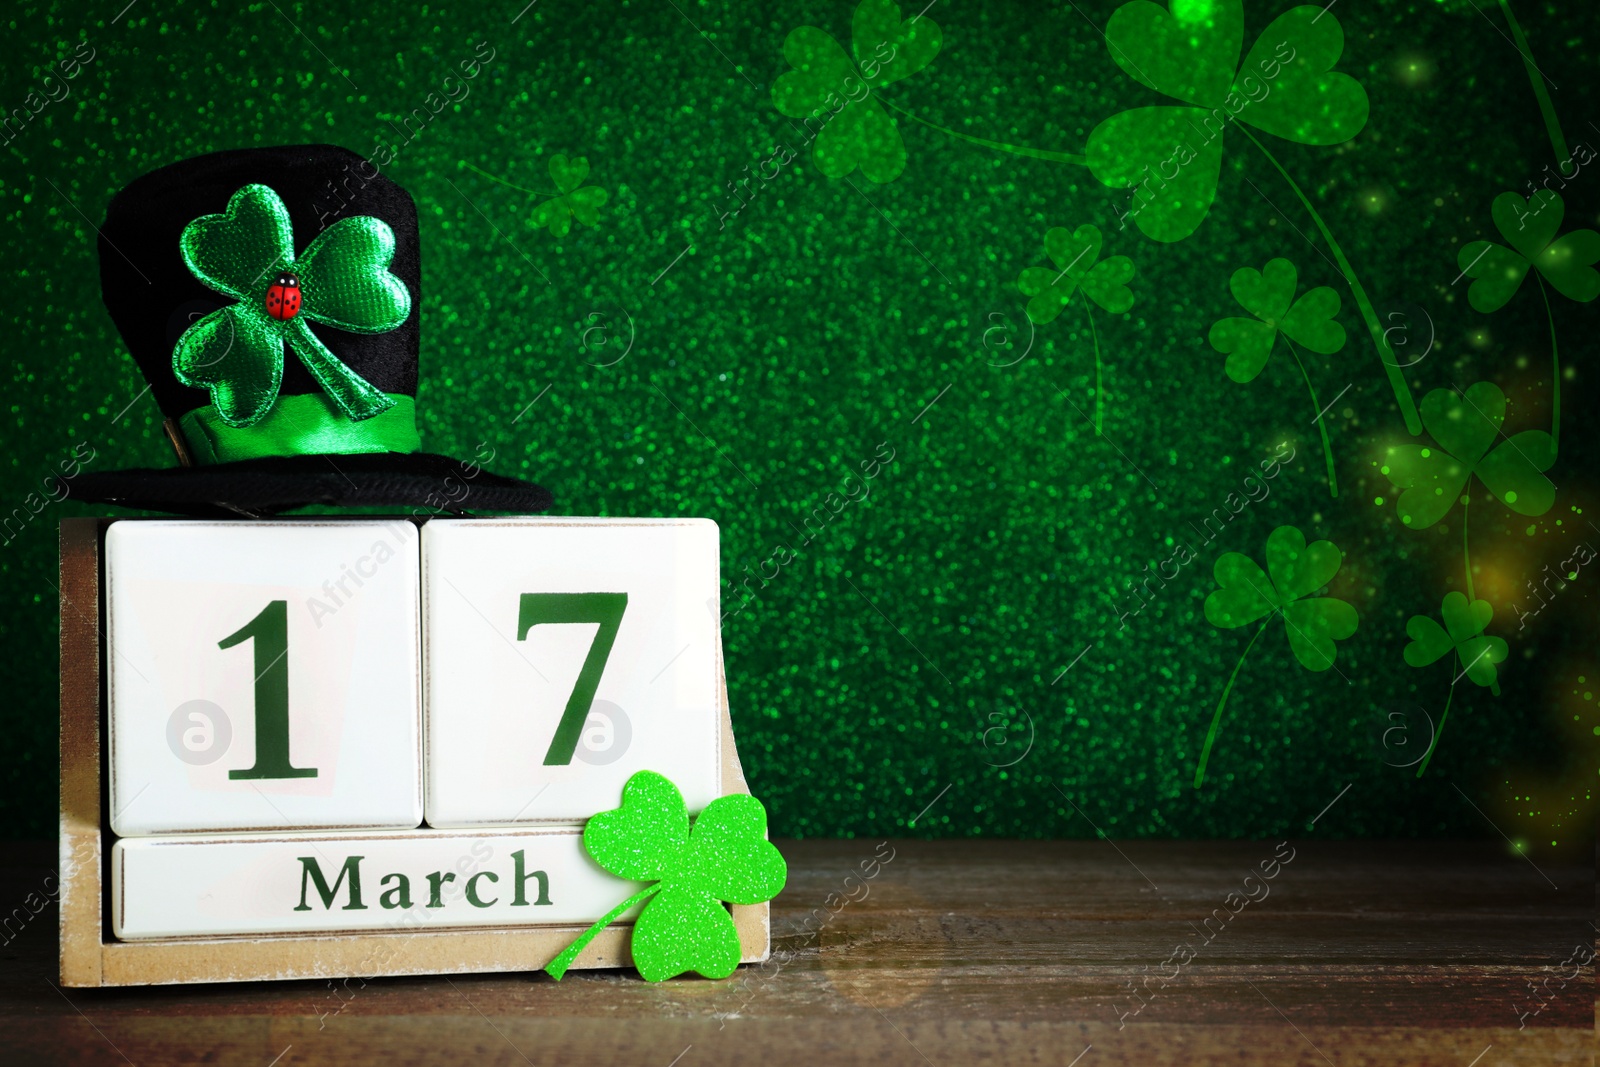 Image of Black leprechaun hat, clover leaf and wooden block calendar on table, space for text. St. Patrick's Day celebration